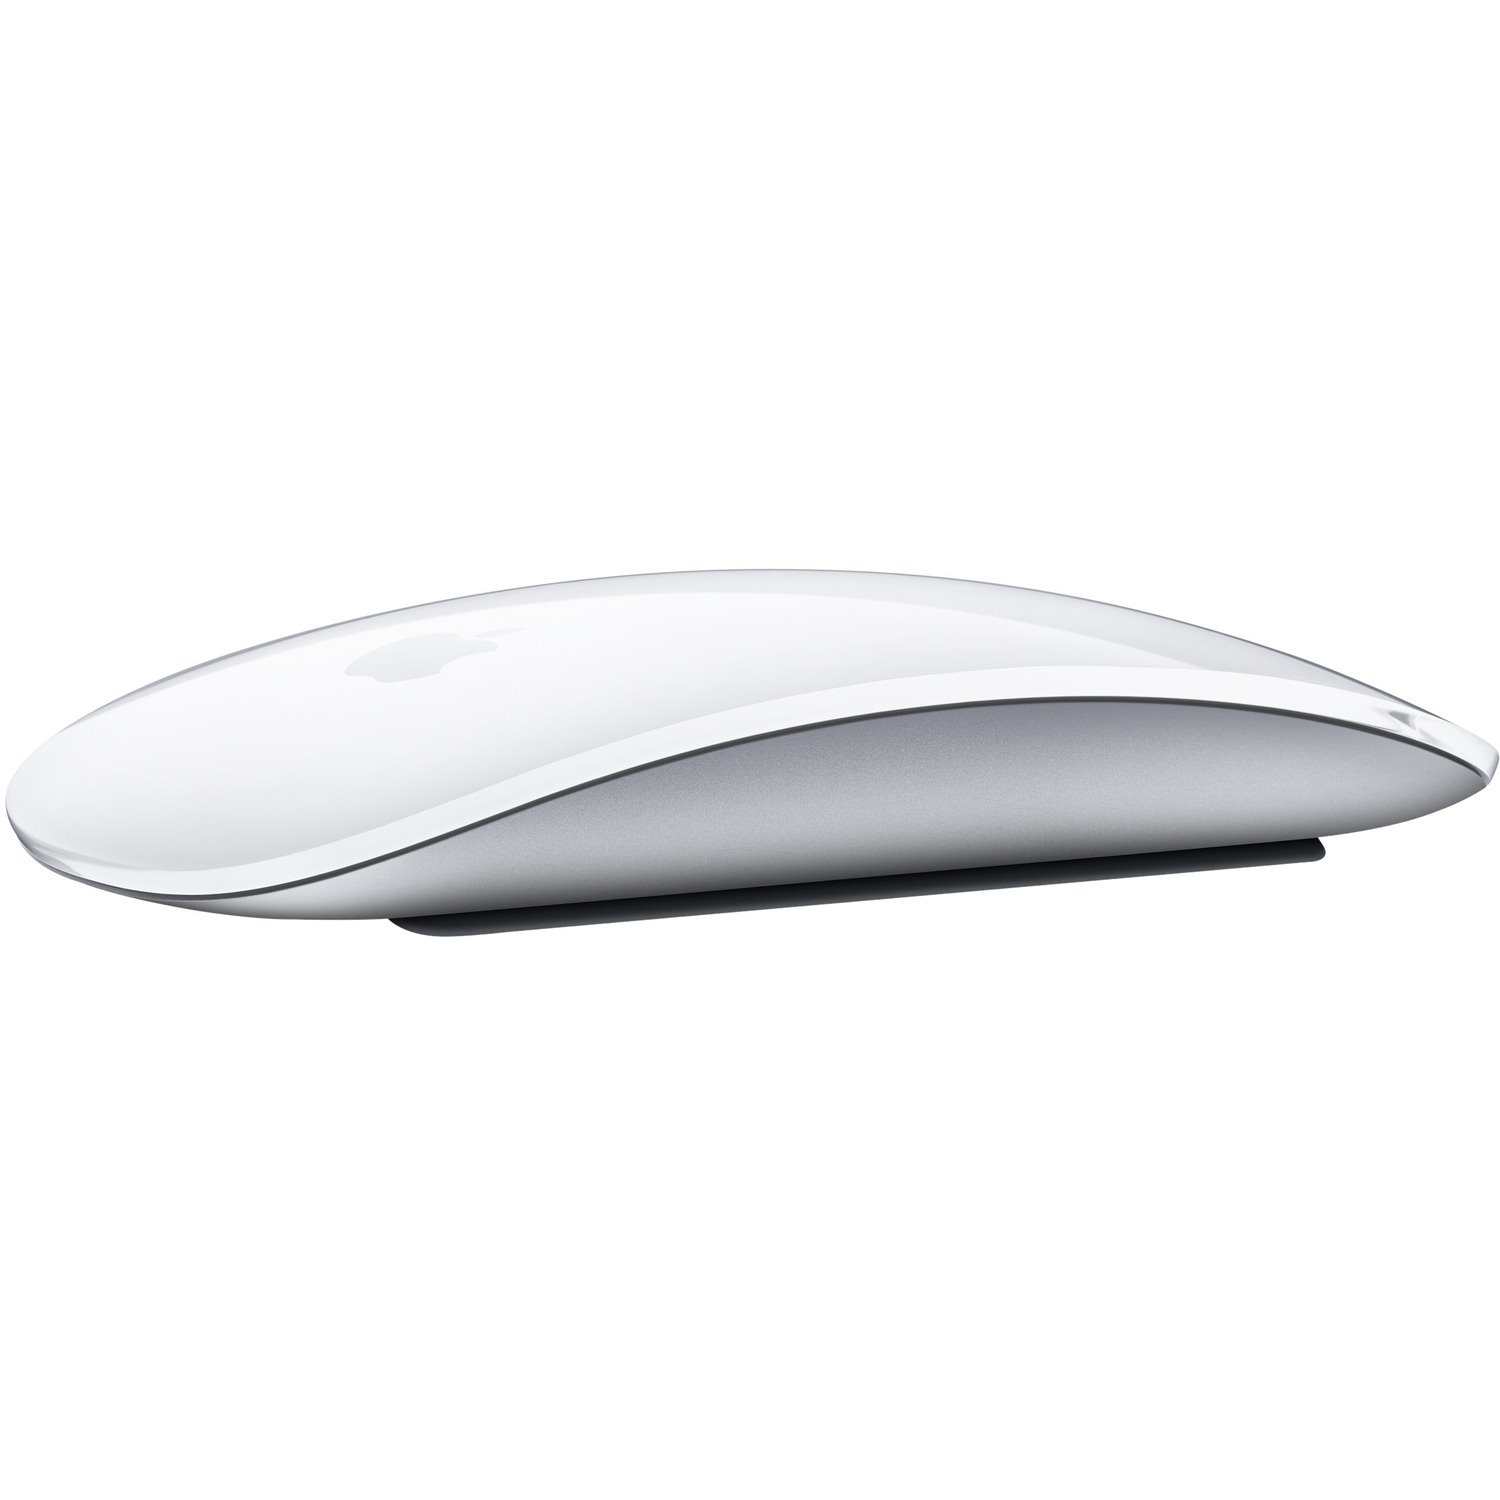 Apple Magic Mouse 2 (Silver) - Cable/Wireless